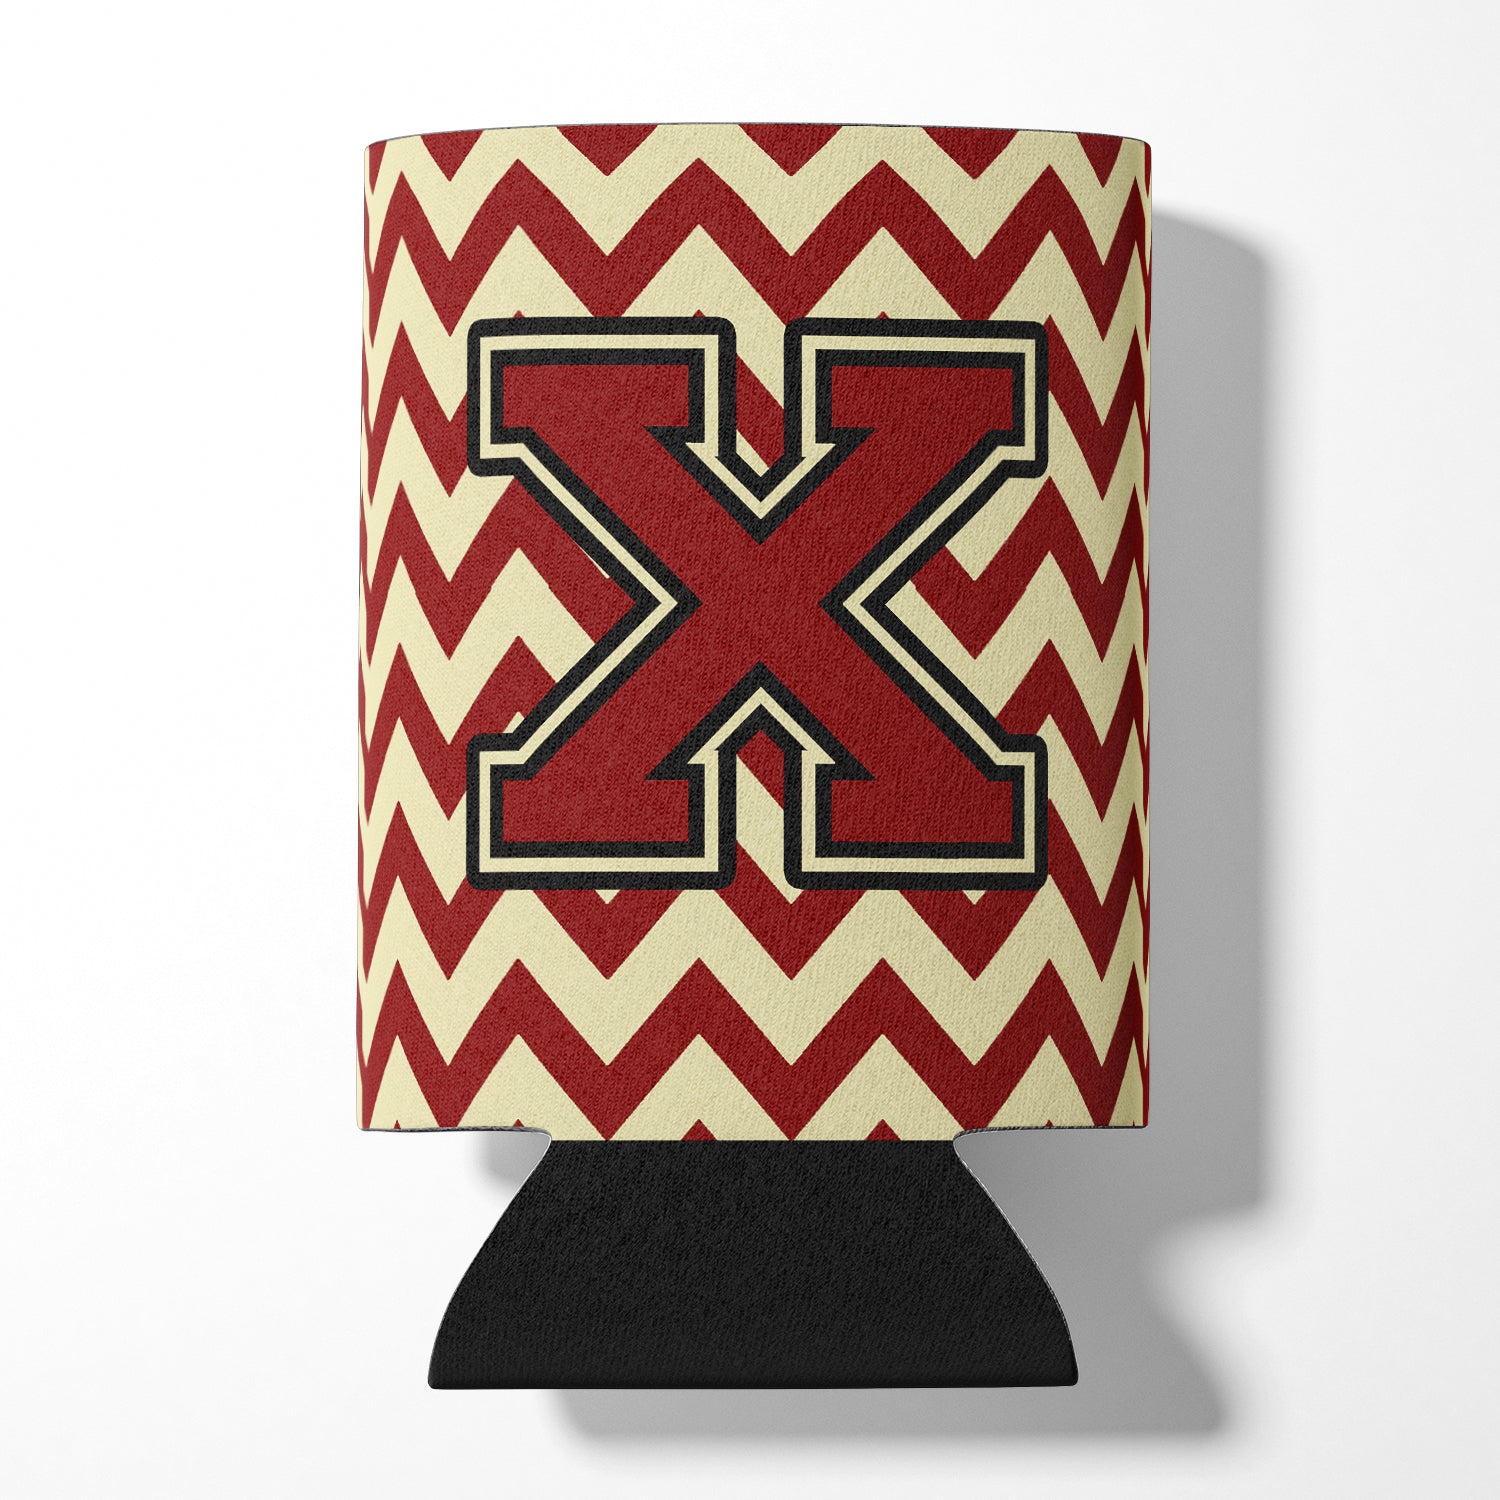 Letter X Chevron Maroon and Gold Can or Bottle Hugger CJ1061-XCC